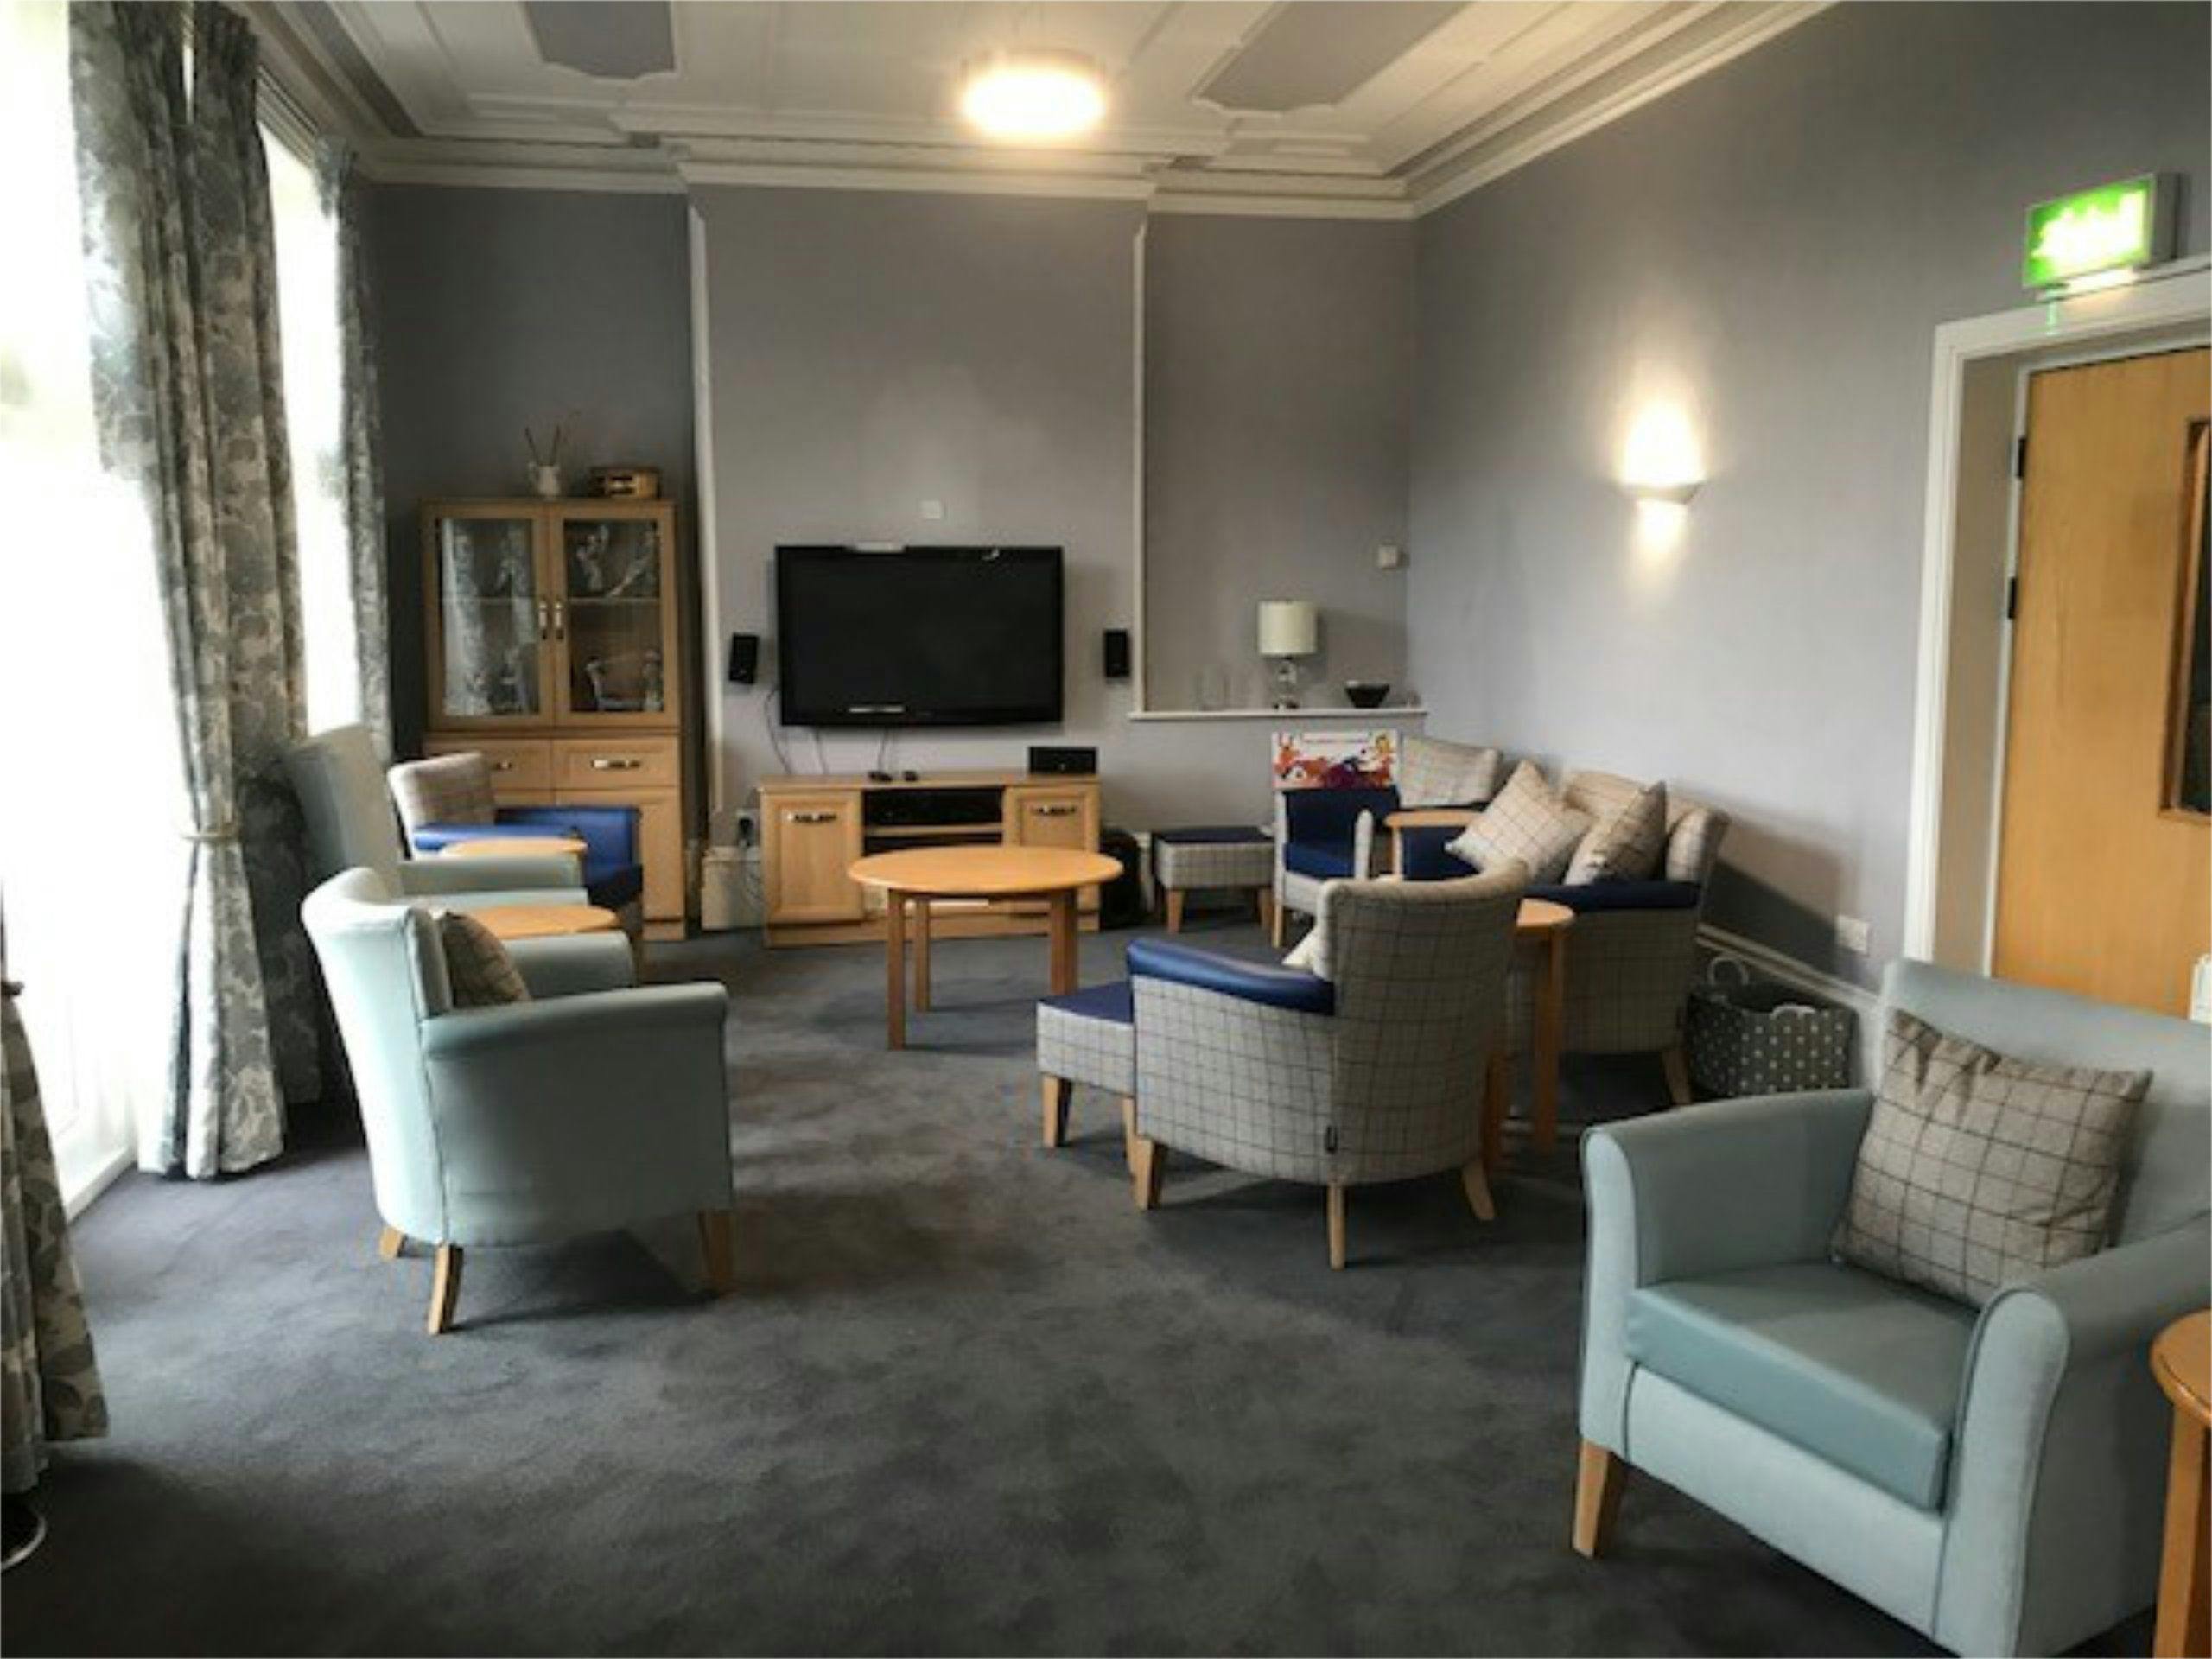 Lounge at Grosvenor House Care Home, St Leonards-on-Sea, Hastings